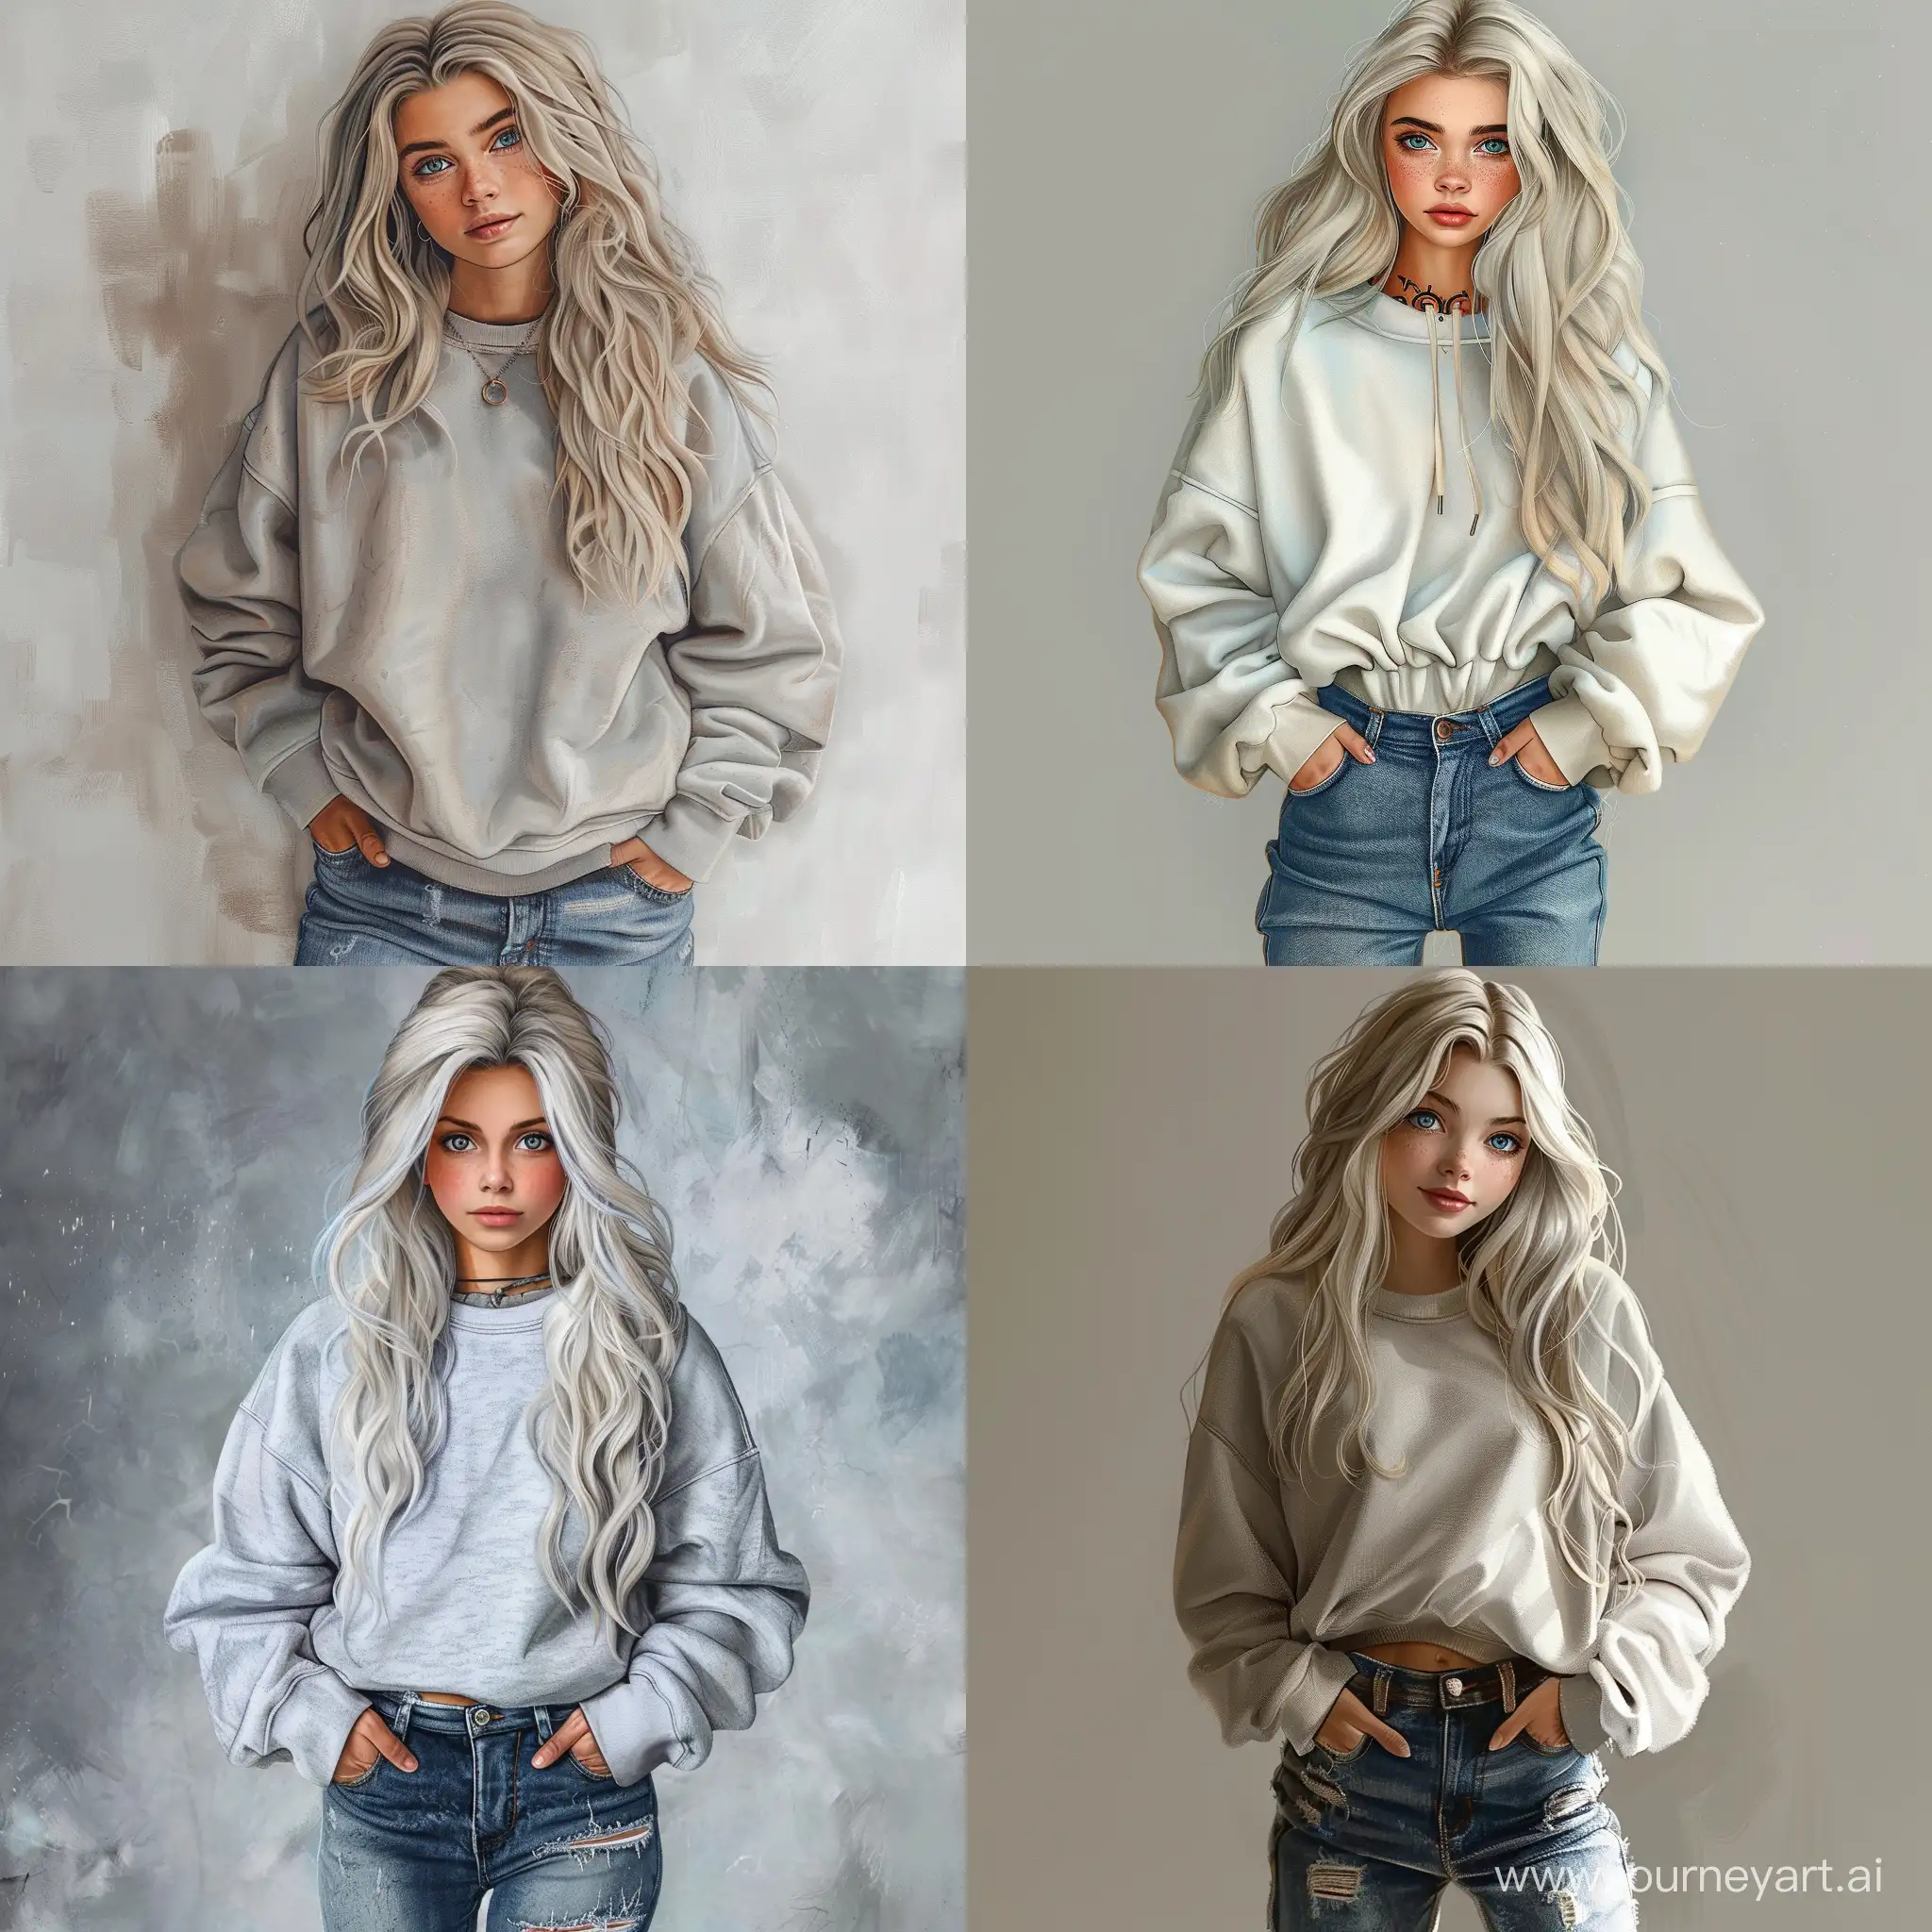 Beautiful girl, blonde hair, gray-blue eyes, white skin, teenager, 15 years old, jeans and oversize sweatshirt, high quality, high detail, realistic art